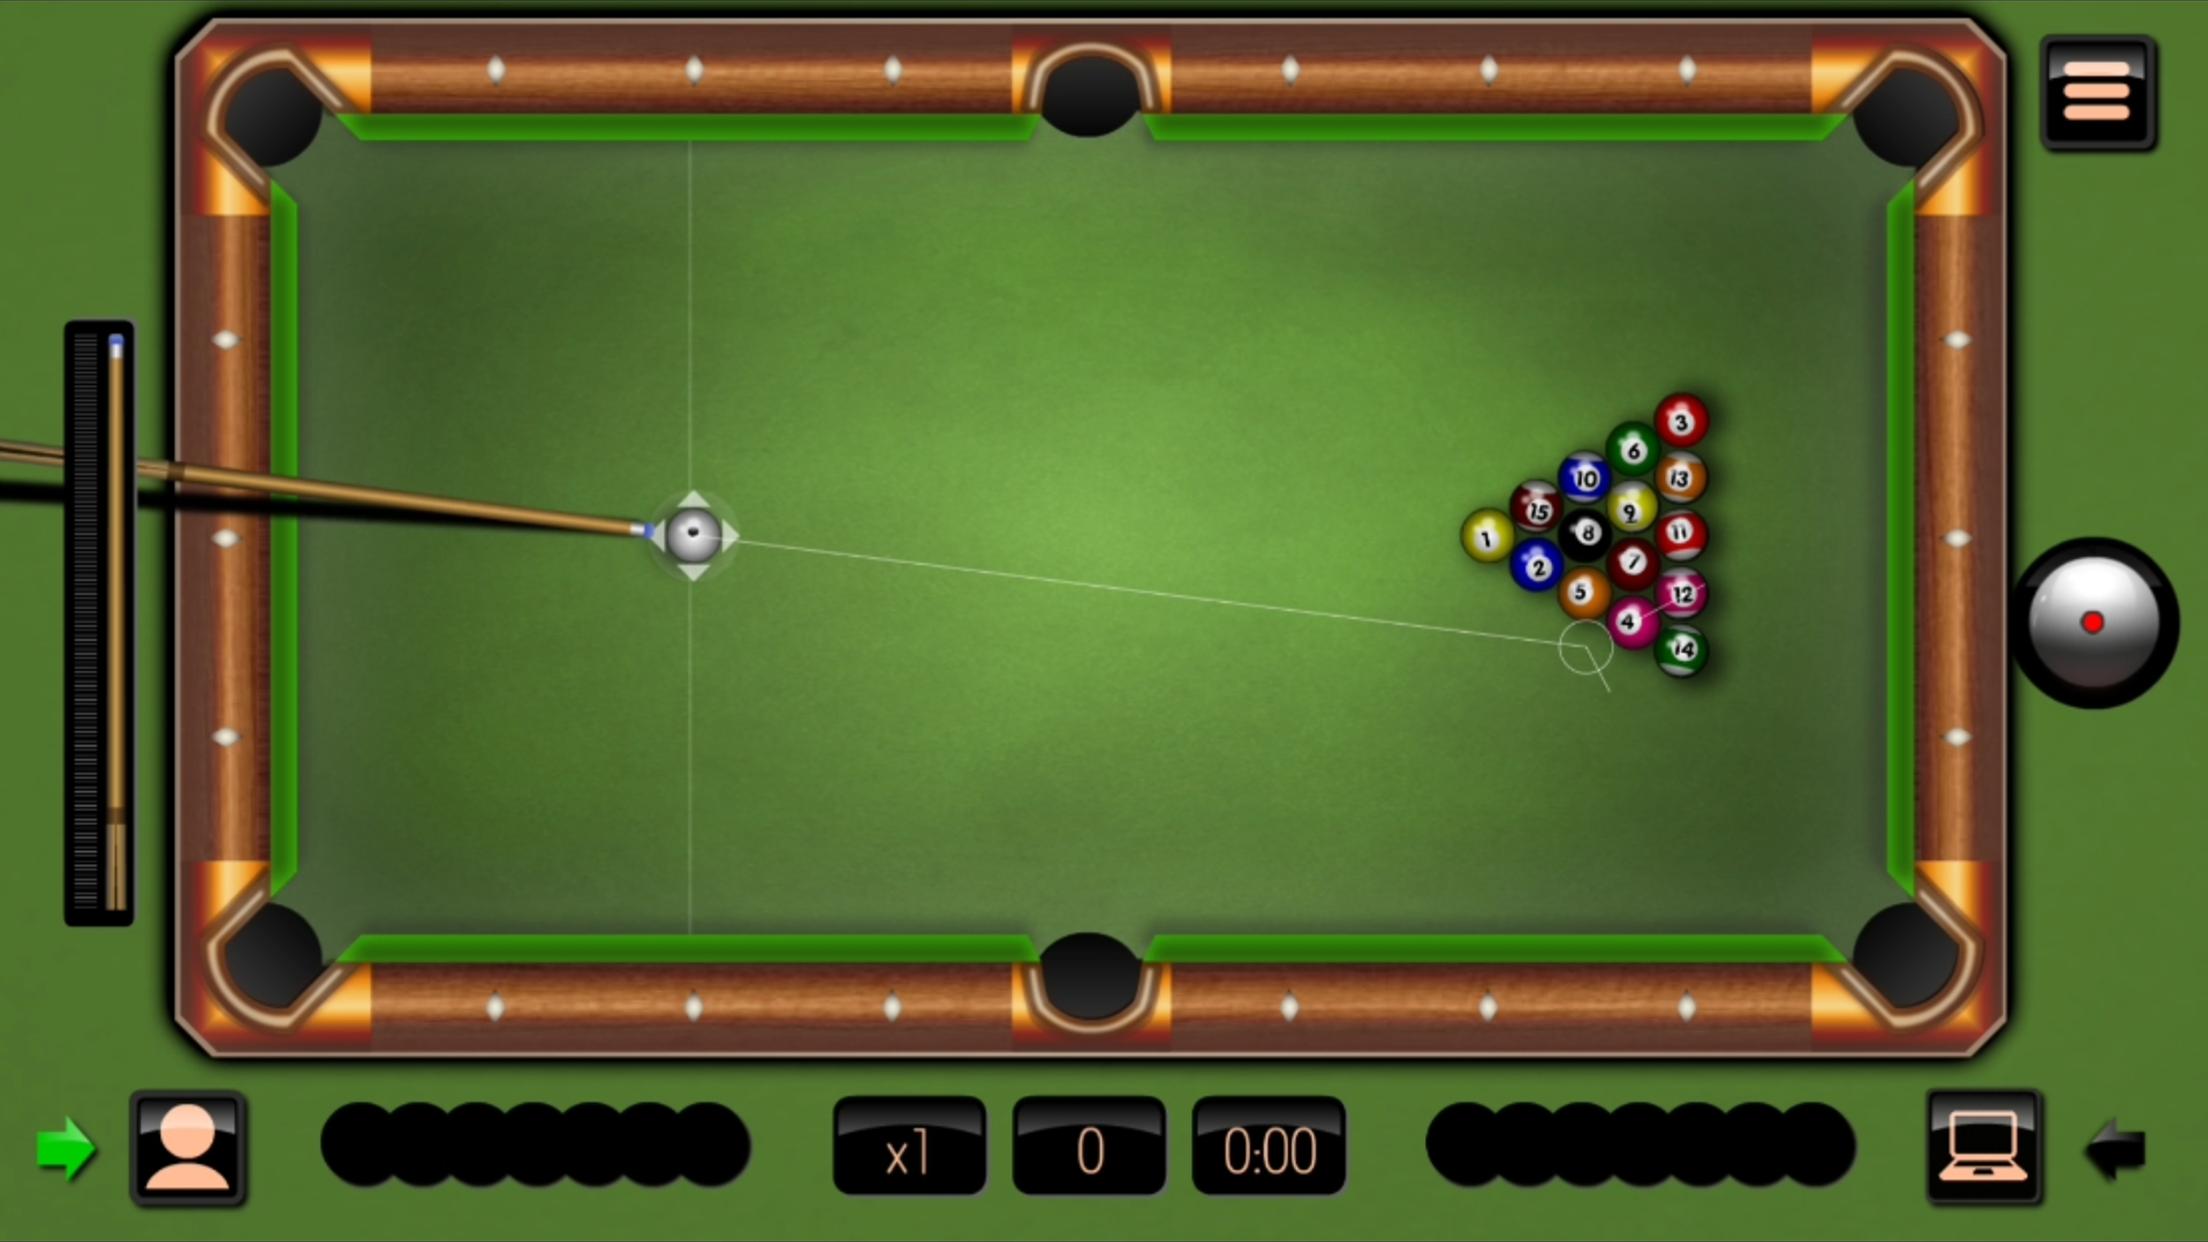 8 Ball Billiards - Classic Eightball Pool for Android - APK ... - 